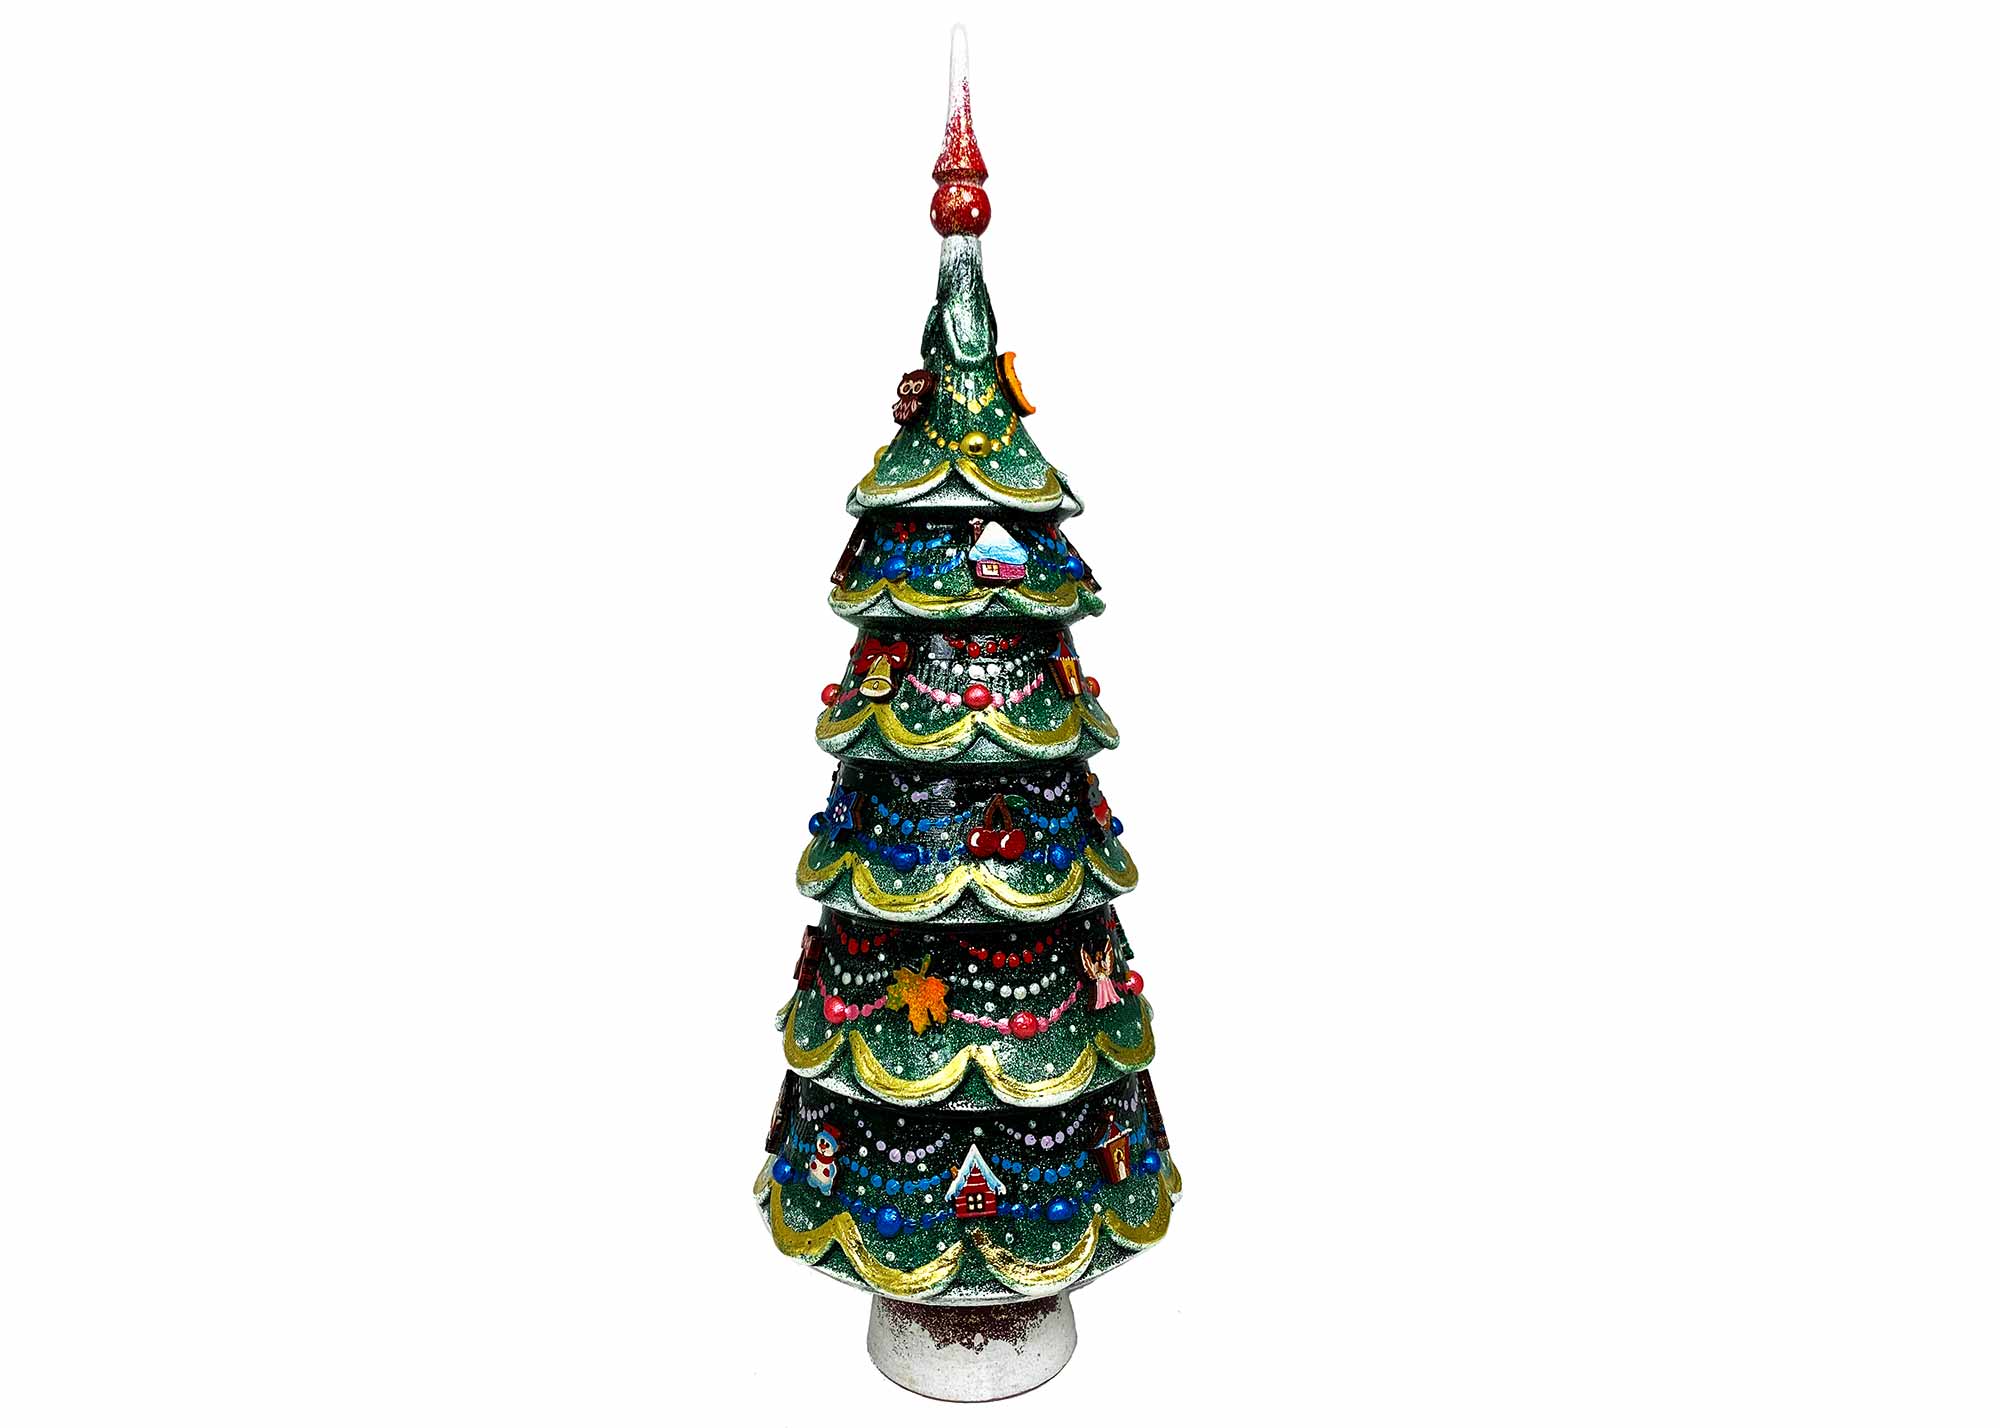 Buy XL Deluxe Christmas Tree with Toys 5pc./13" at GoldenCockerel.com